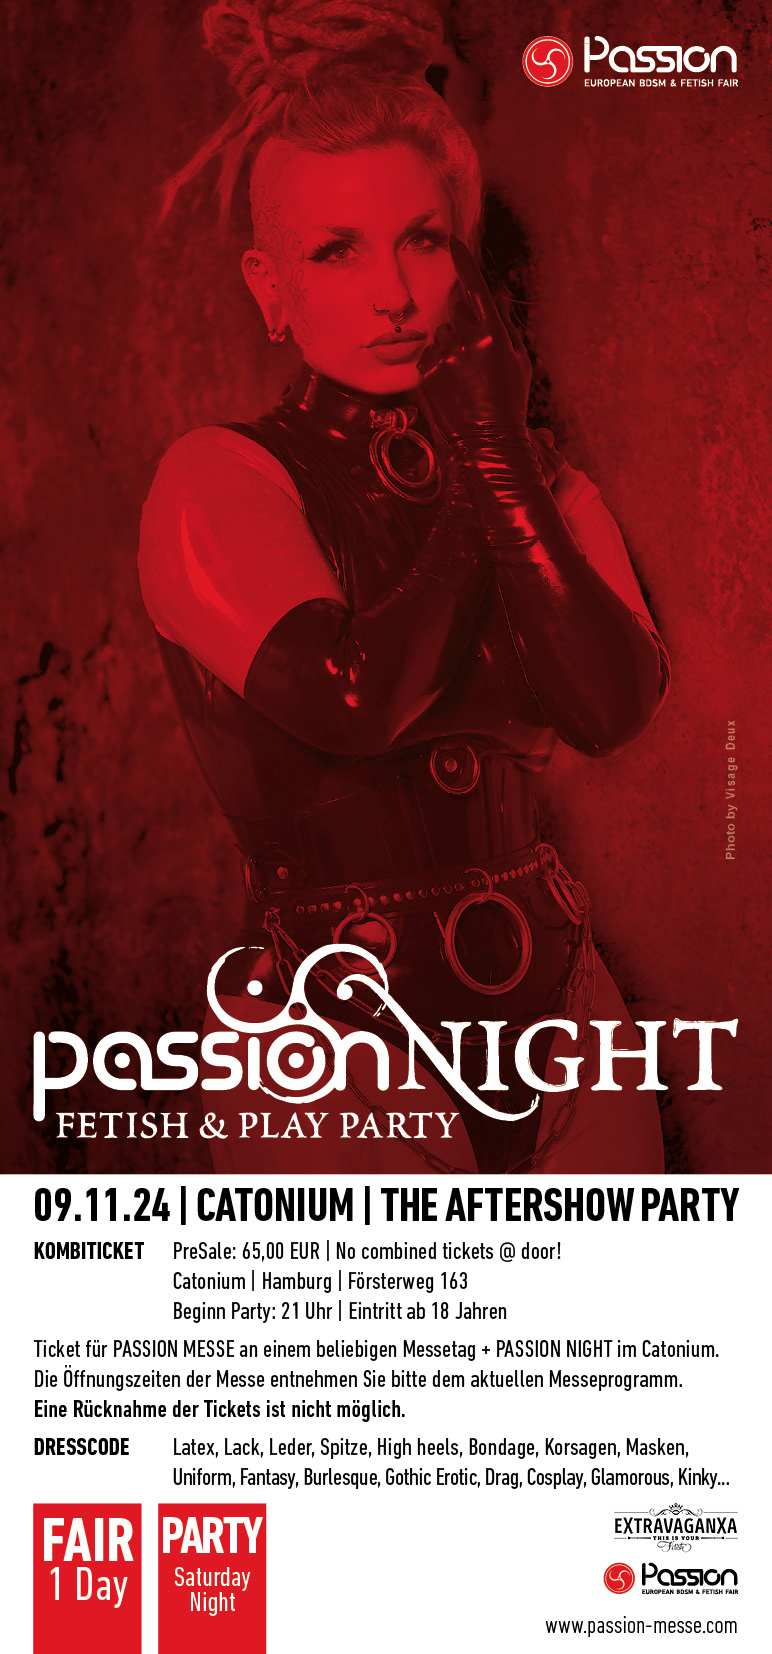 Passion Messe - Combiticket Exhibition + Passion Night